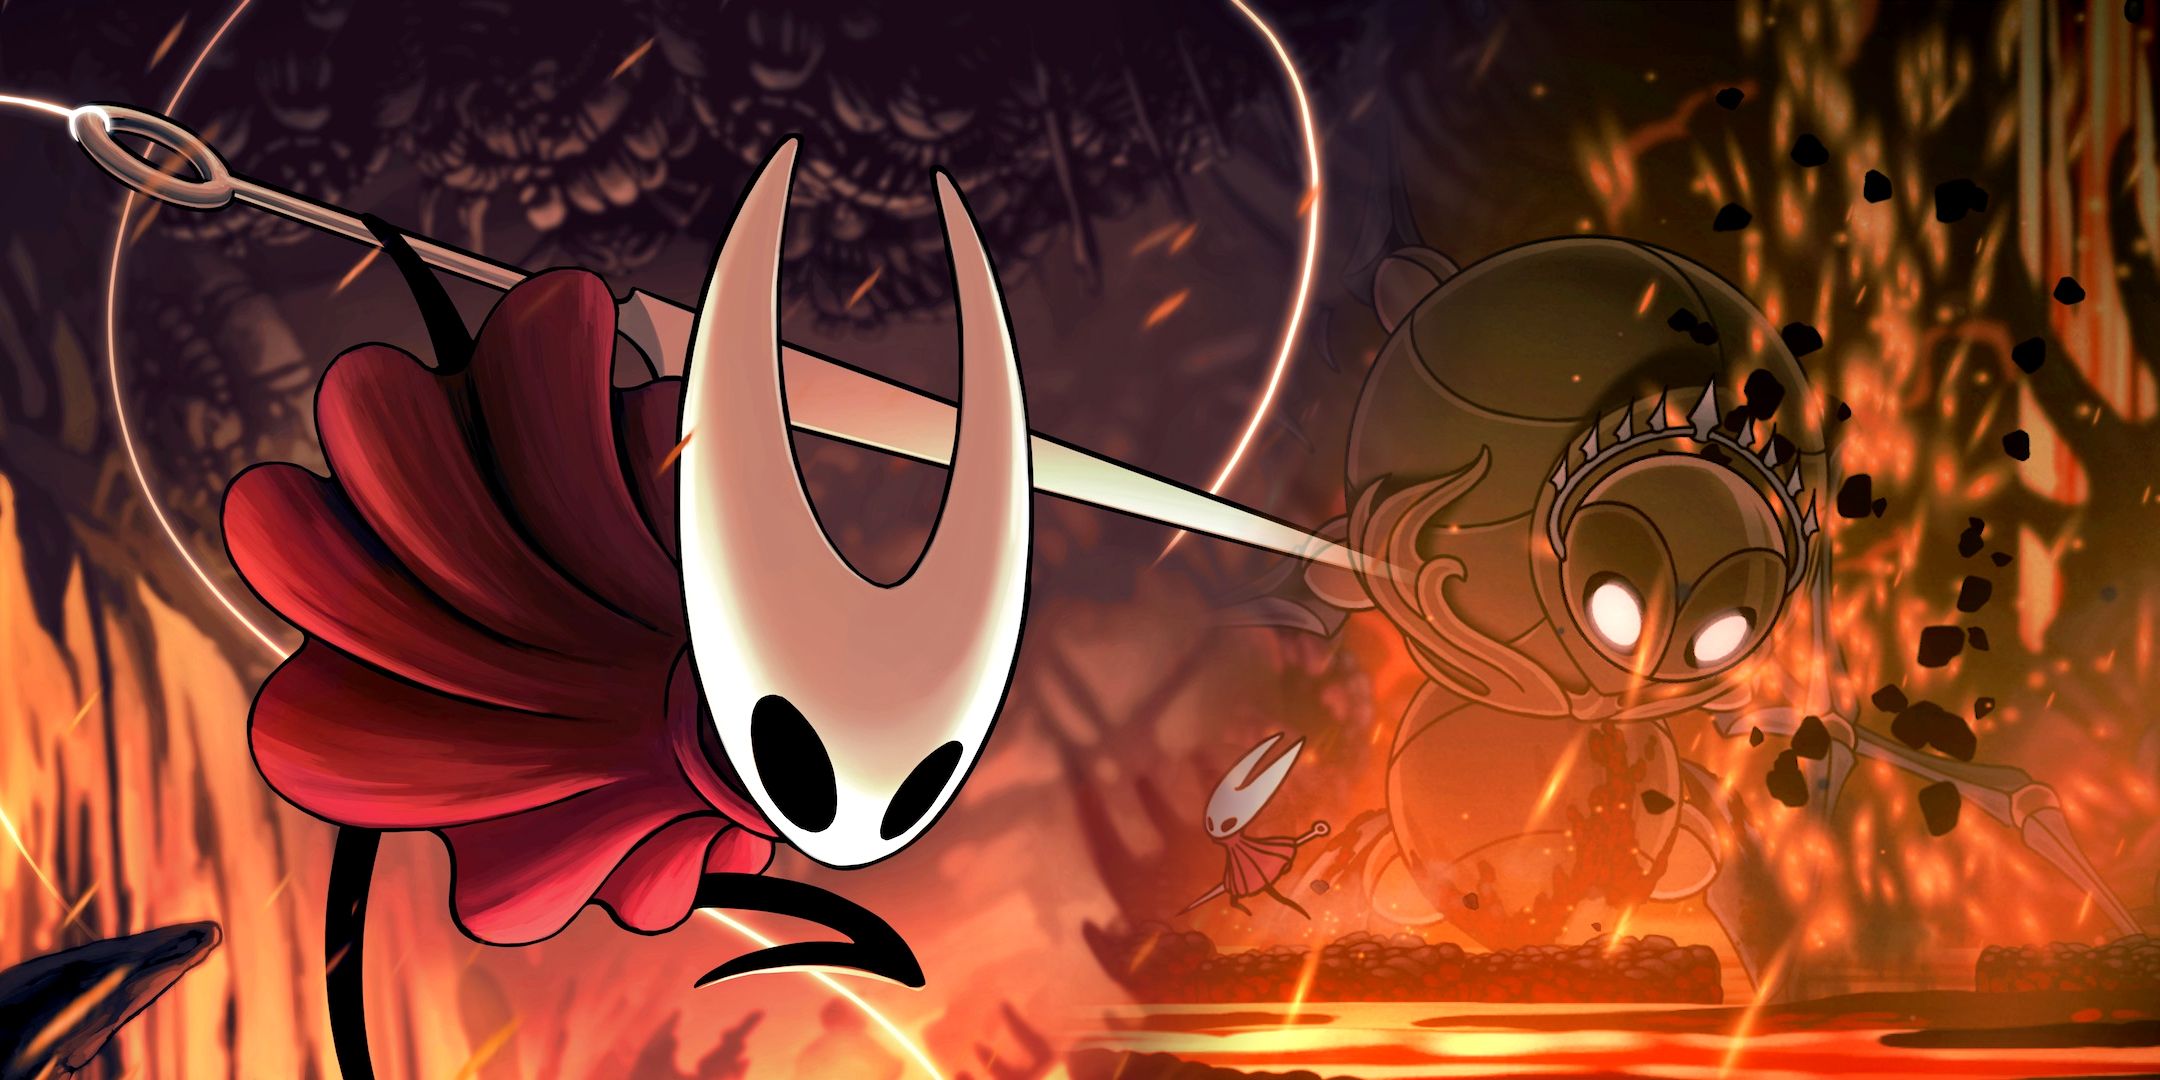 Hollow Knight Silksong promotional art blending into an image of fighting a boss in the game.